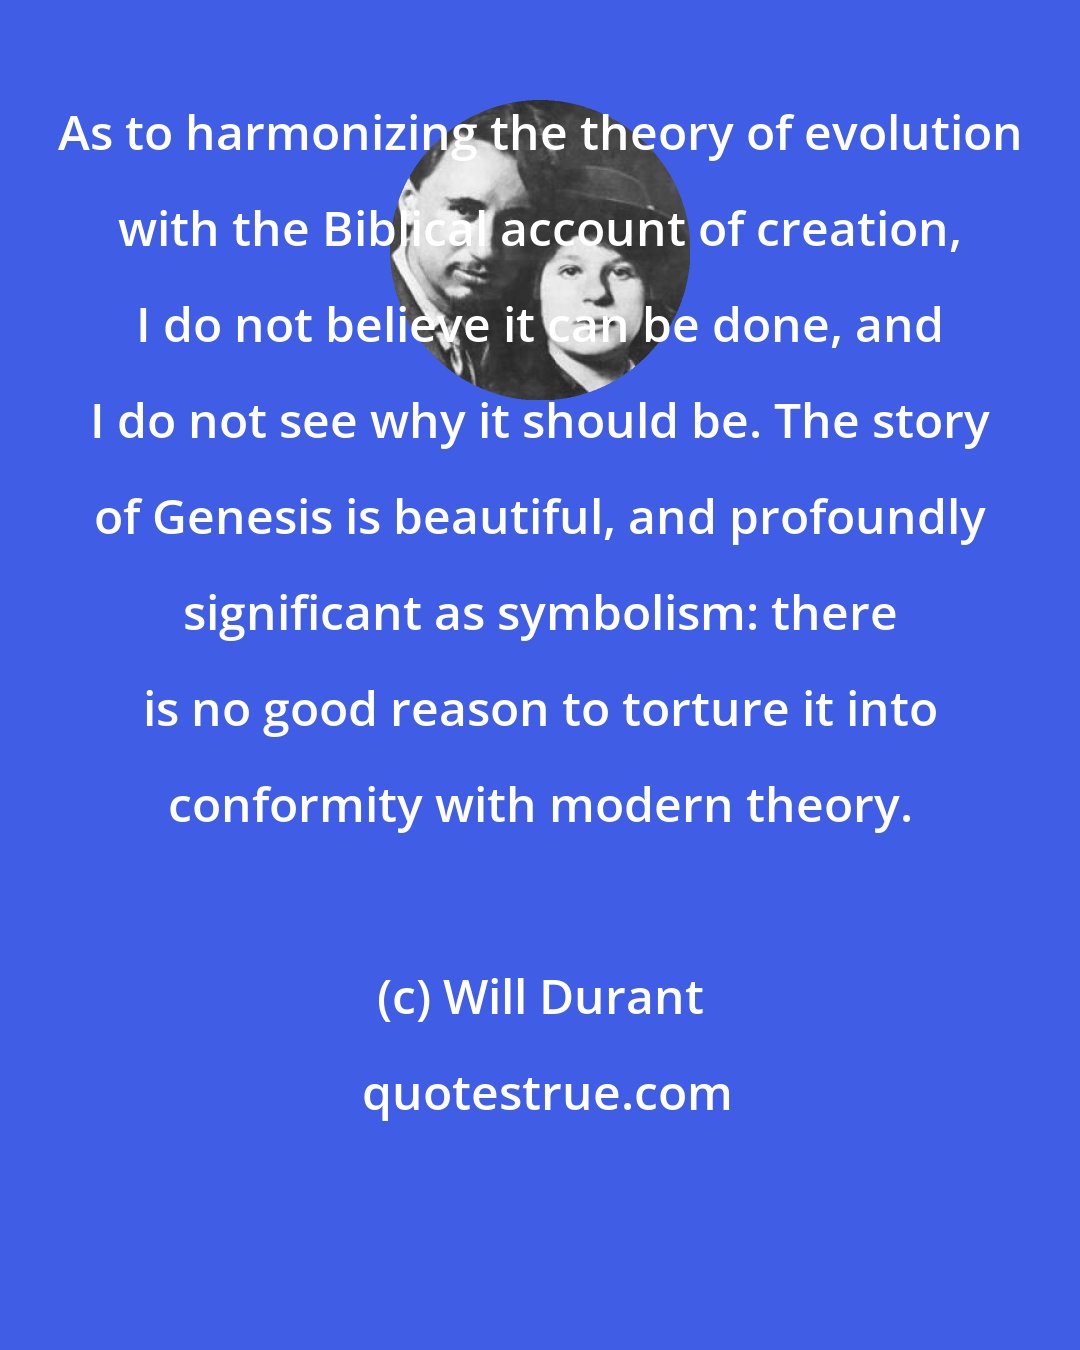 Will Durant: As to harmonizing the theory of evolution with the Biblical account of creation, I do not believe it can be done, and I do not see why it should be. The story of Genesis is beautiful, and profoundly significant as symbolism: there is no good reason to torture it into conformity with modern theory.